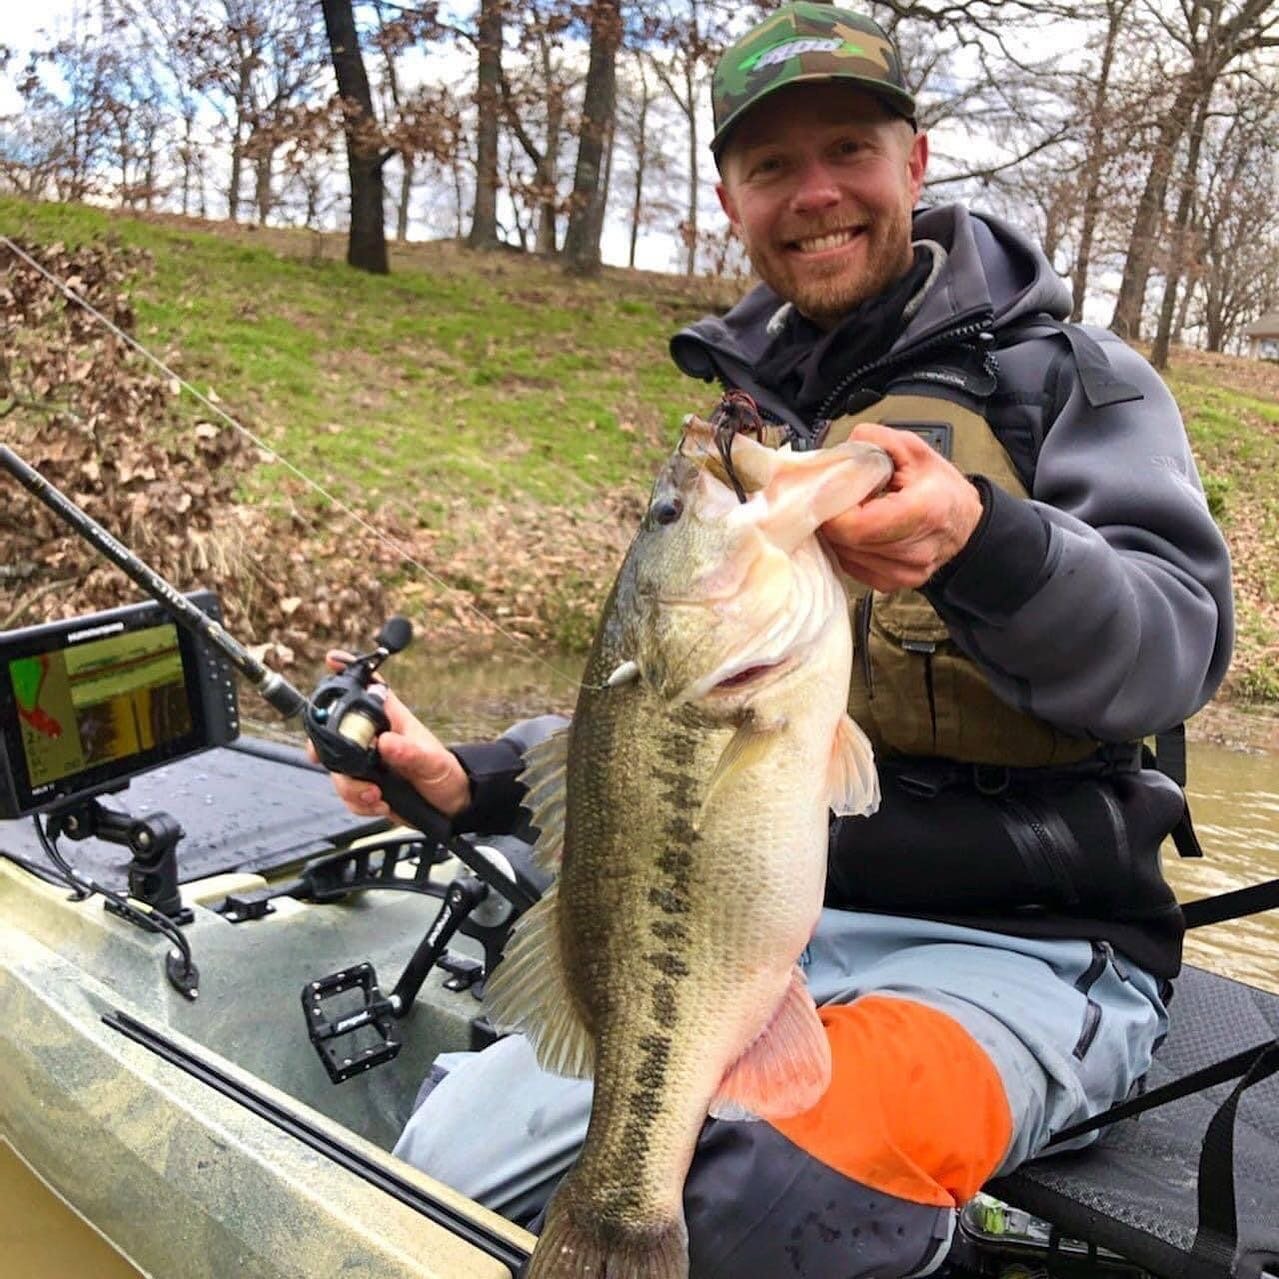 .
New Episode.
&mdash;Link in Bio&mdash;

Today on Bass Fishing For Noobs, 2020 KBF Ten champion Rus Snyders joins Ryan and Sean and gives some insight on breaking down water, top water fishing and a lot more. Make sure to check this one out!.
.
.
#b